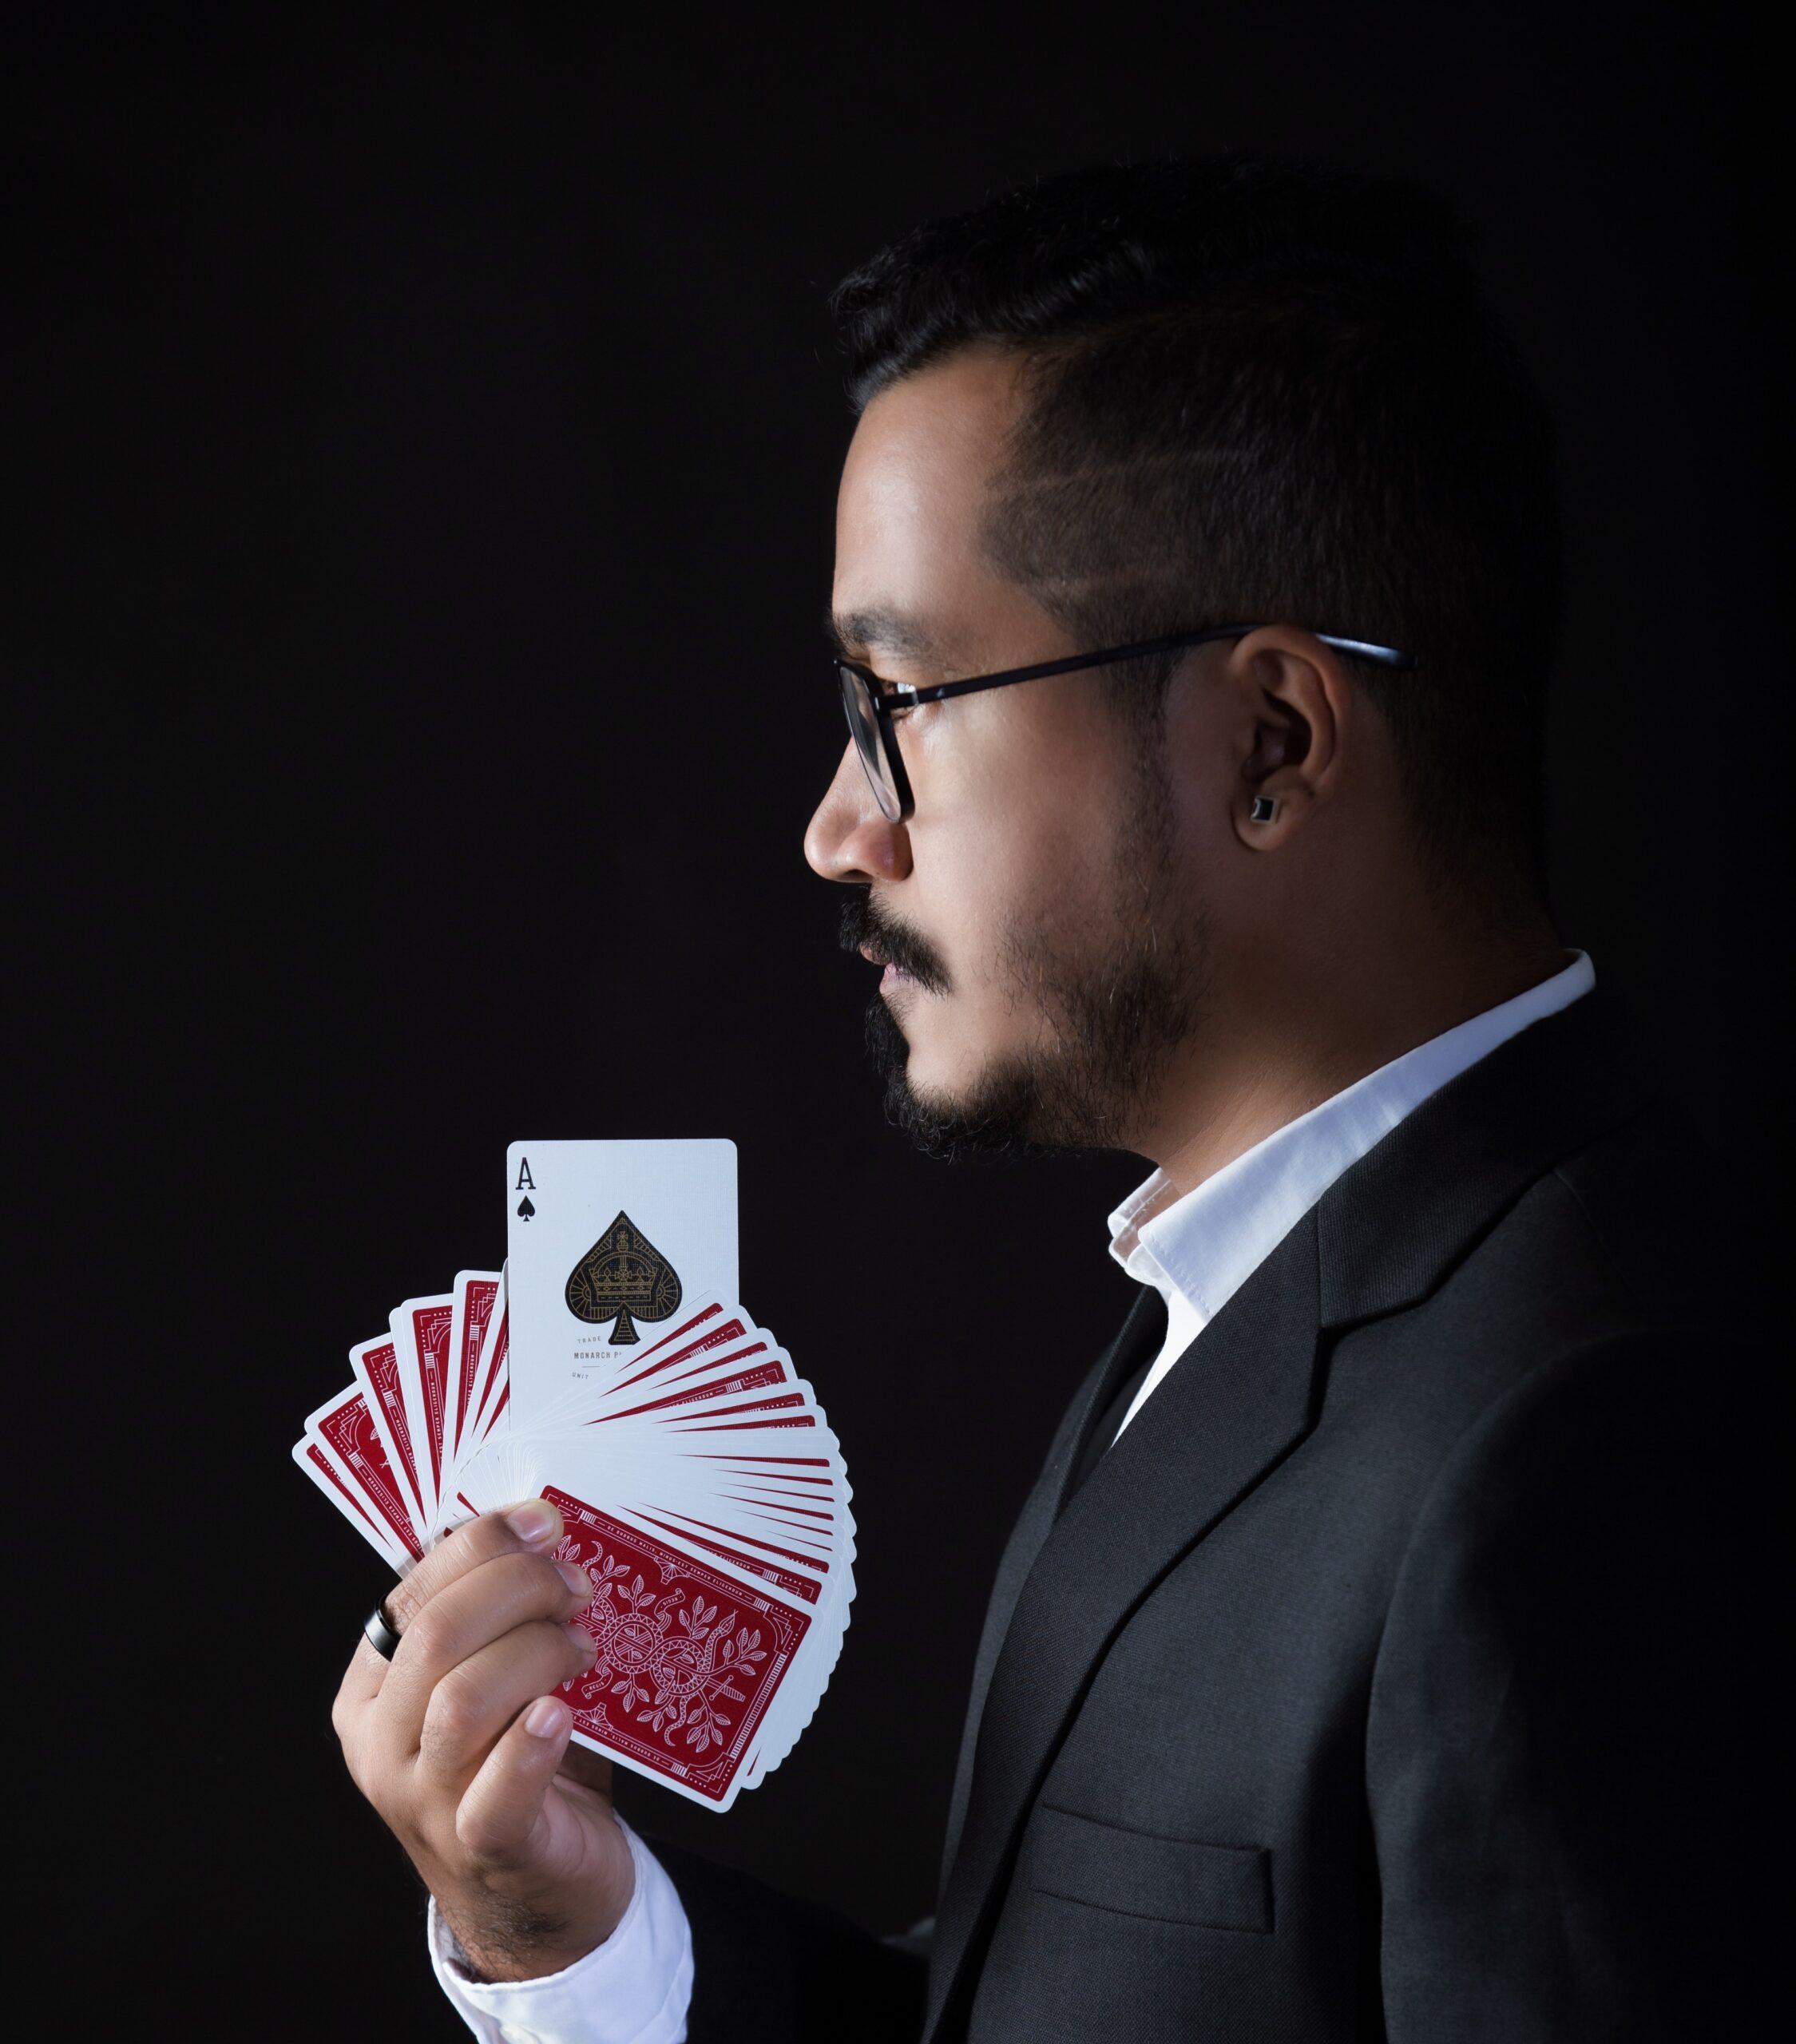 Magician And Mentalist Kunal Newar holding cards with Ace card being visible